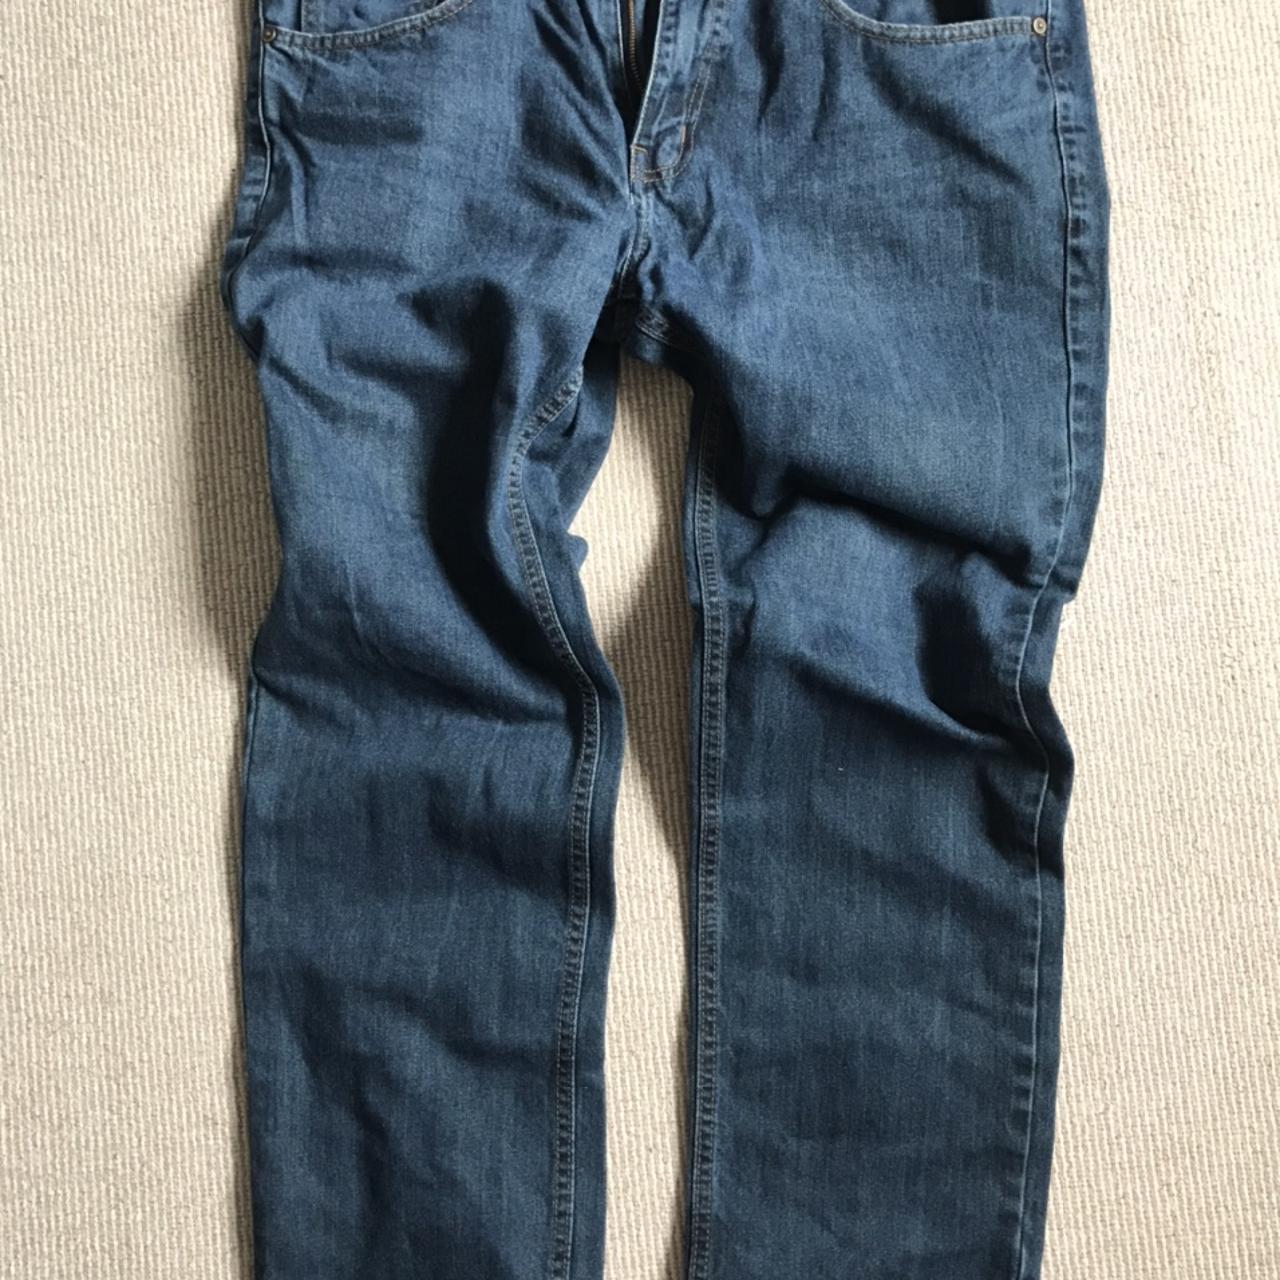 New look slim fit jeans great condition just a... - Depop